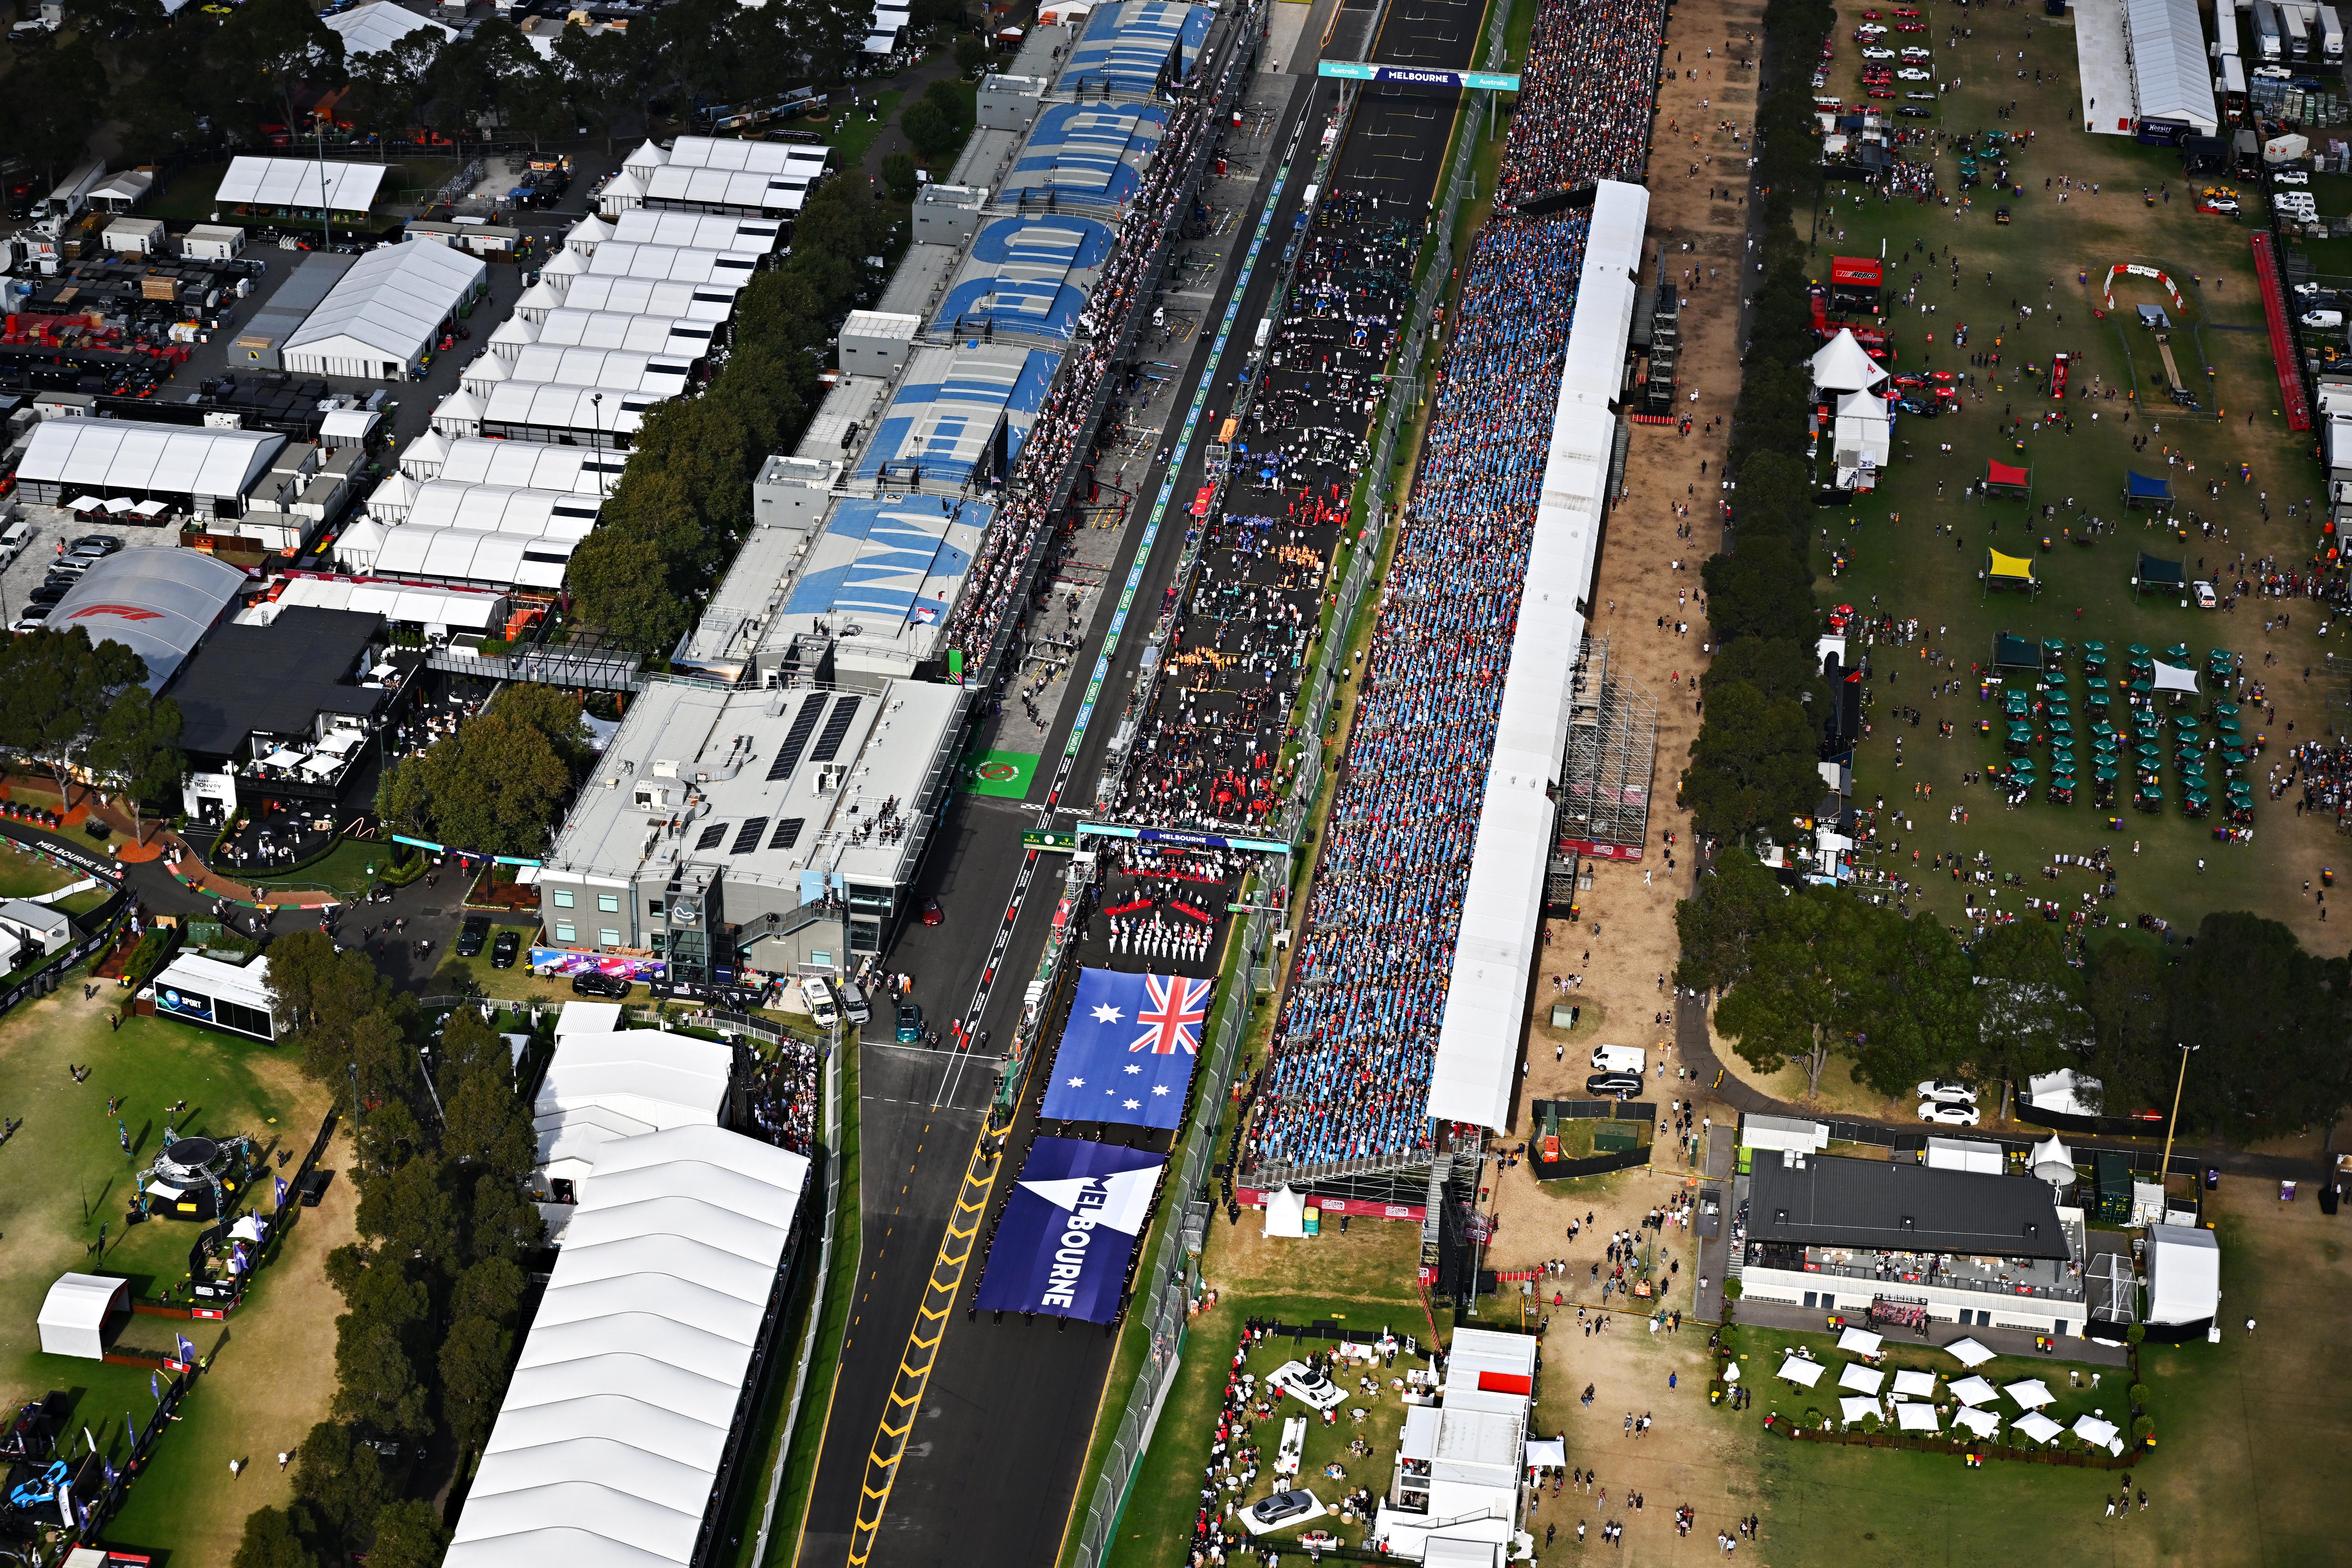 A general view of the grid during the F1 Grand Prix of Australia at Melbourne Grand Prix Circuit on April 10, 2022 in Melbourne, Australia.